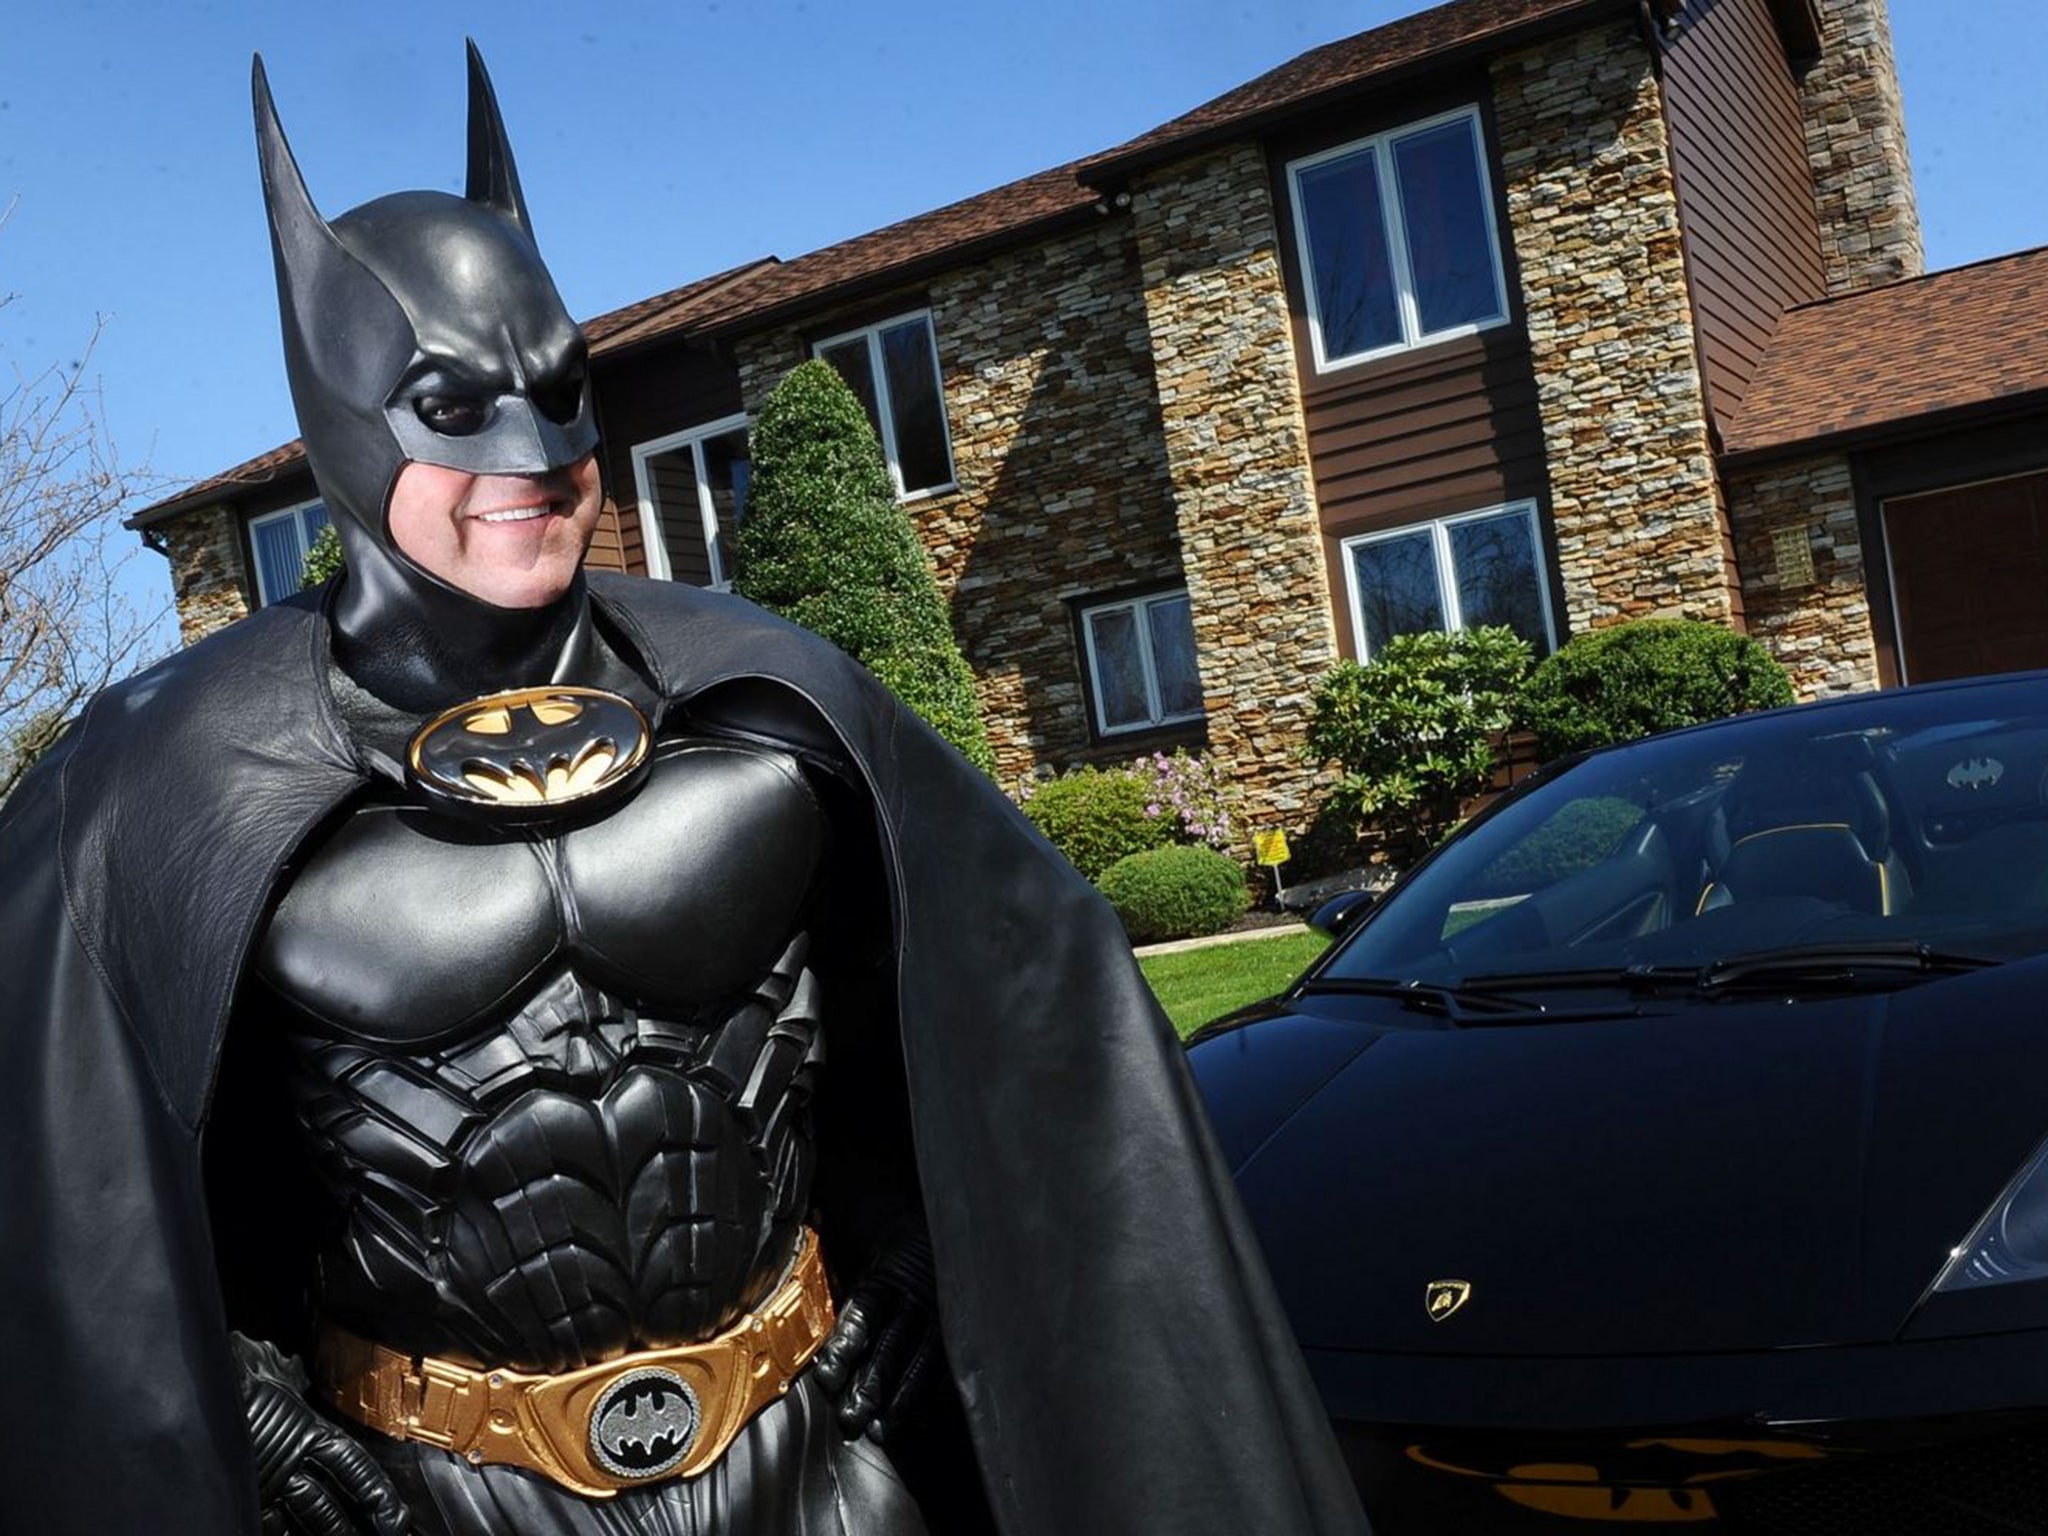 Lenny B. Robinson dressed up as Batman to hand out gifts at hospitals